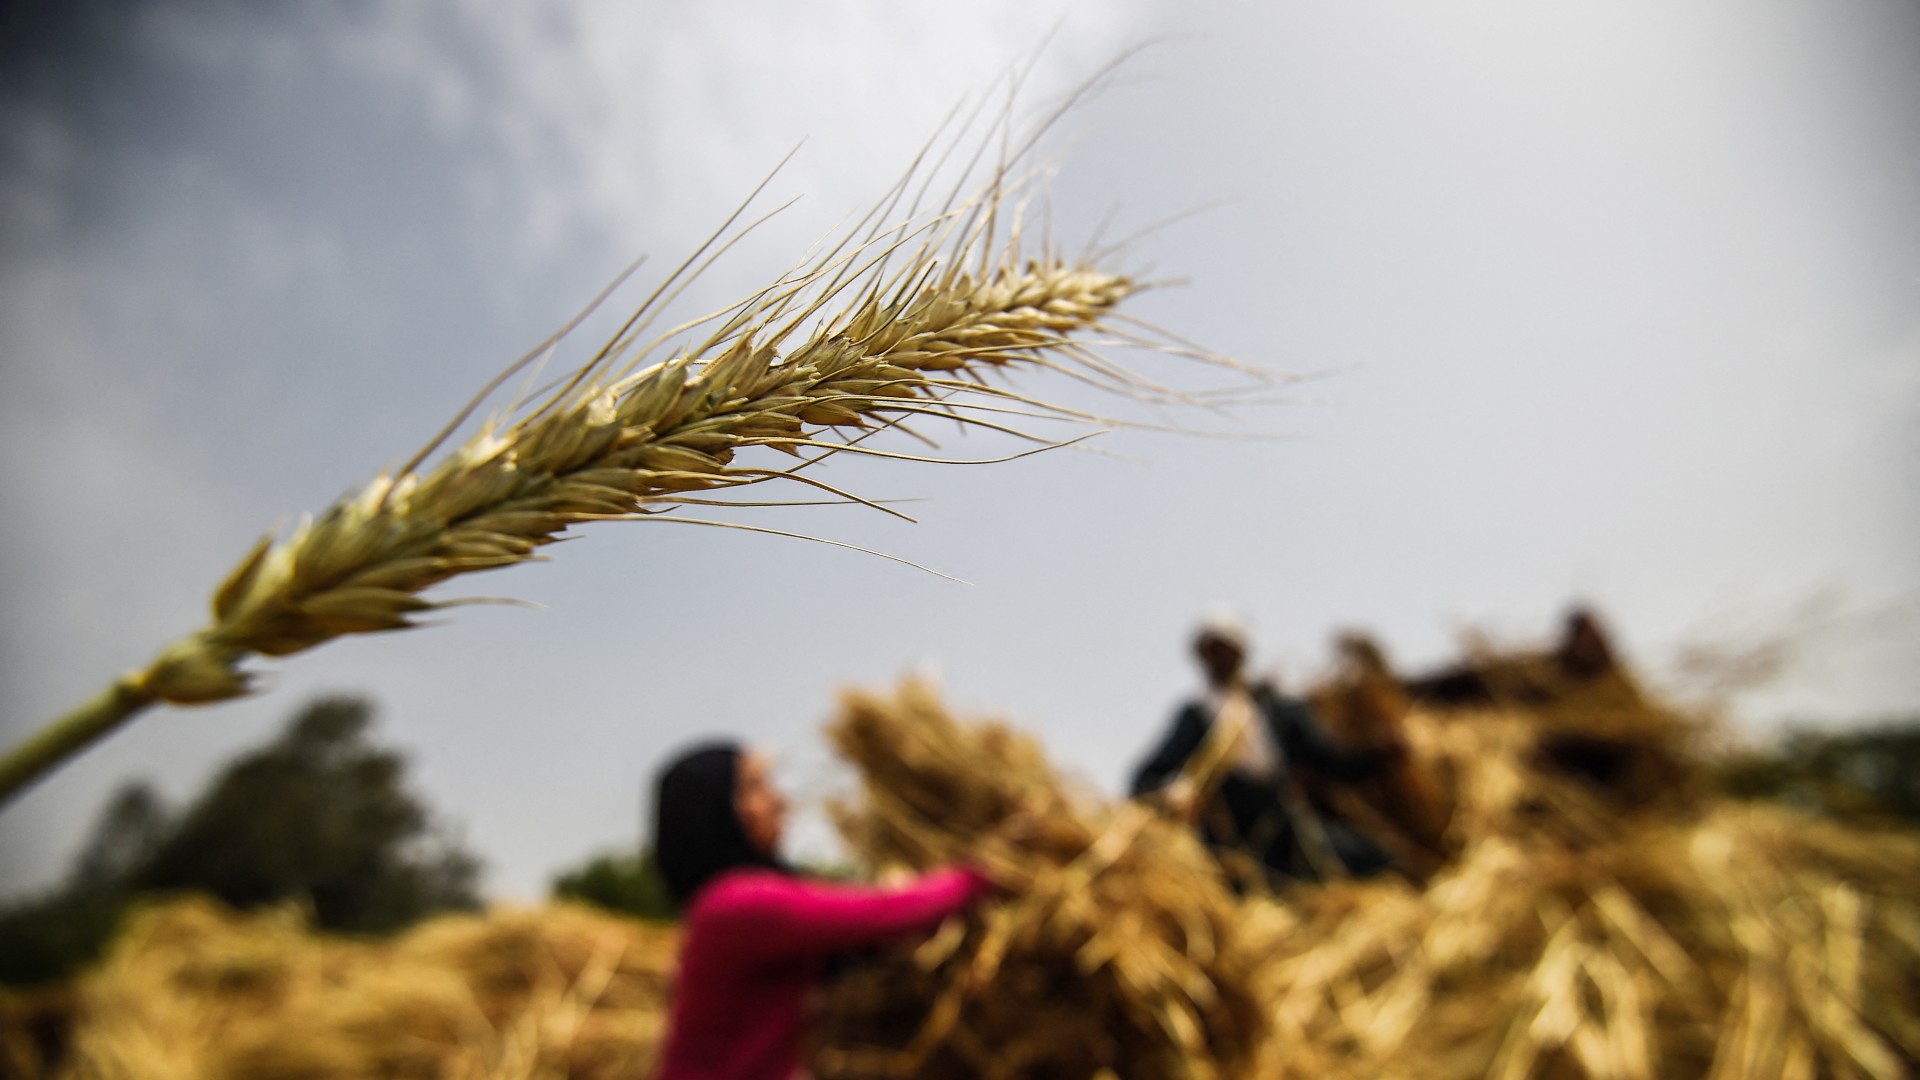 Egyptian farmers harvest wheat in Saqiyat al-Manqadi village in the northern Nile Delta province of Menoufia in Egypt, on May 1, 2019.